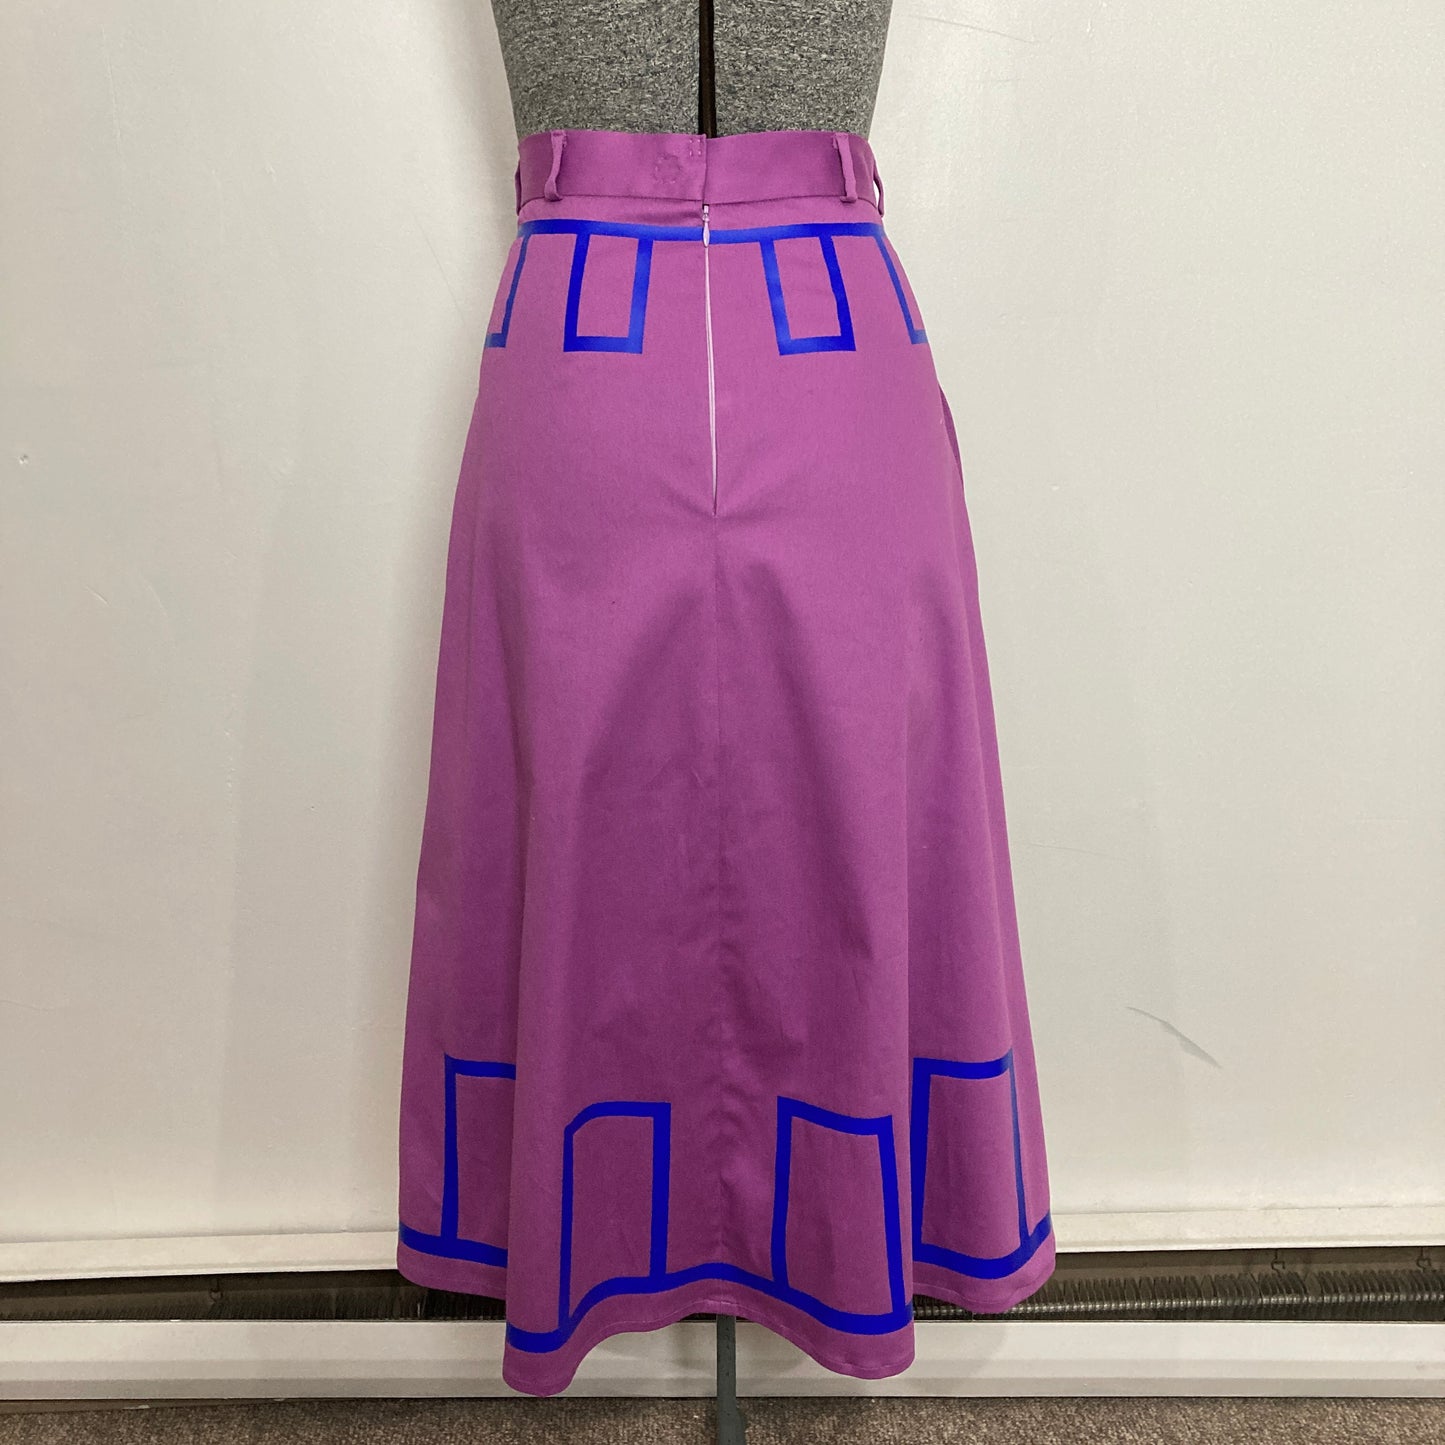 Simple A-Line Skirt sewing Pattern/Downloadable PDF File and Tutorial Book